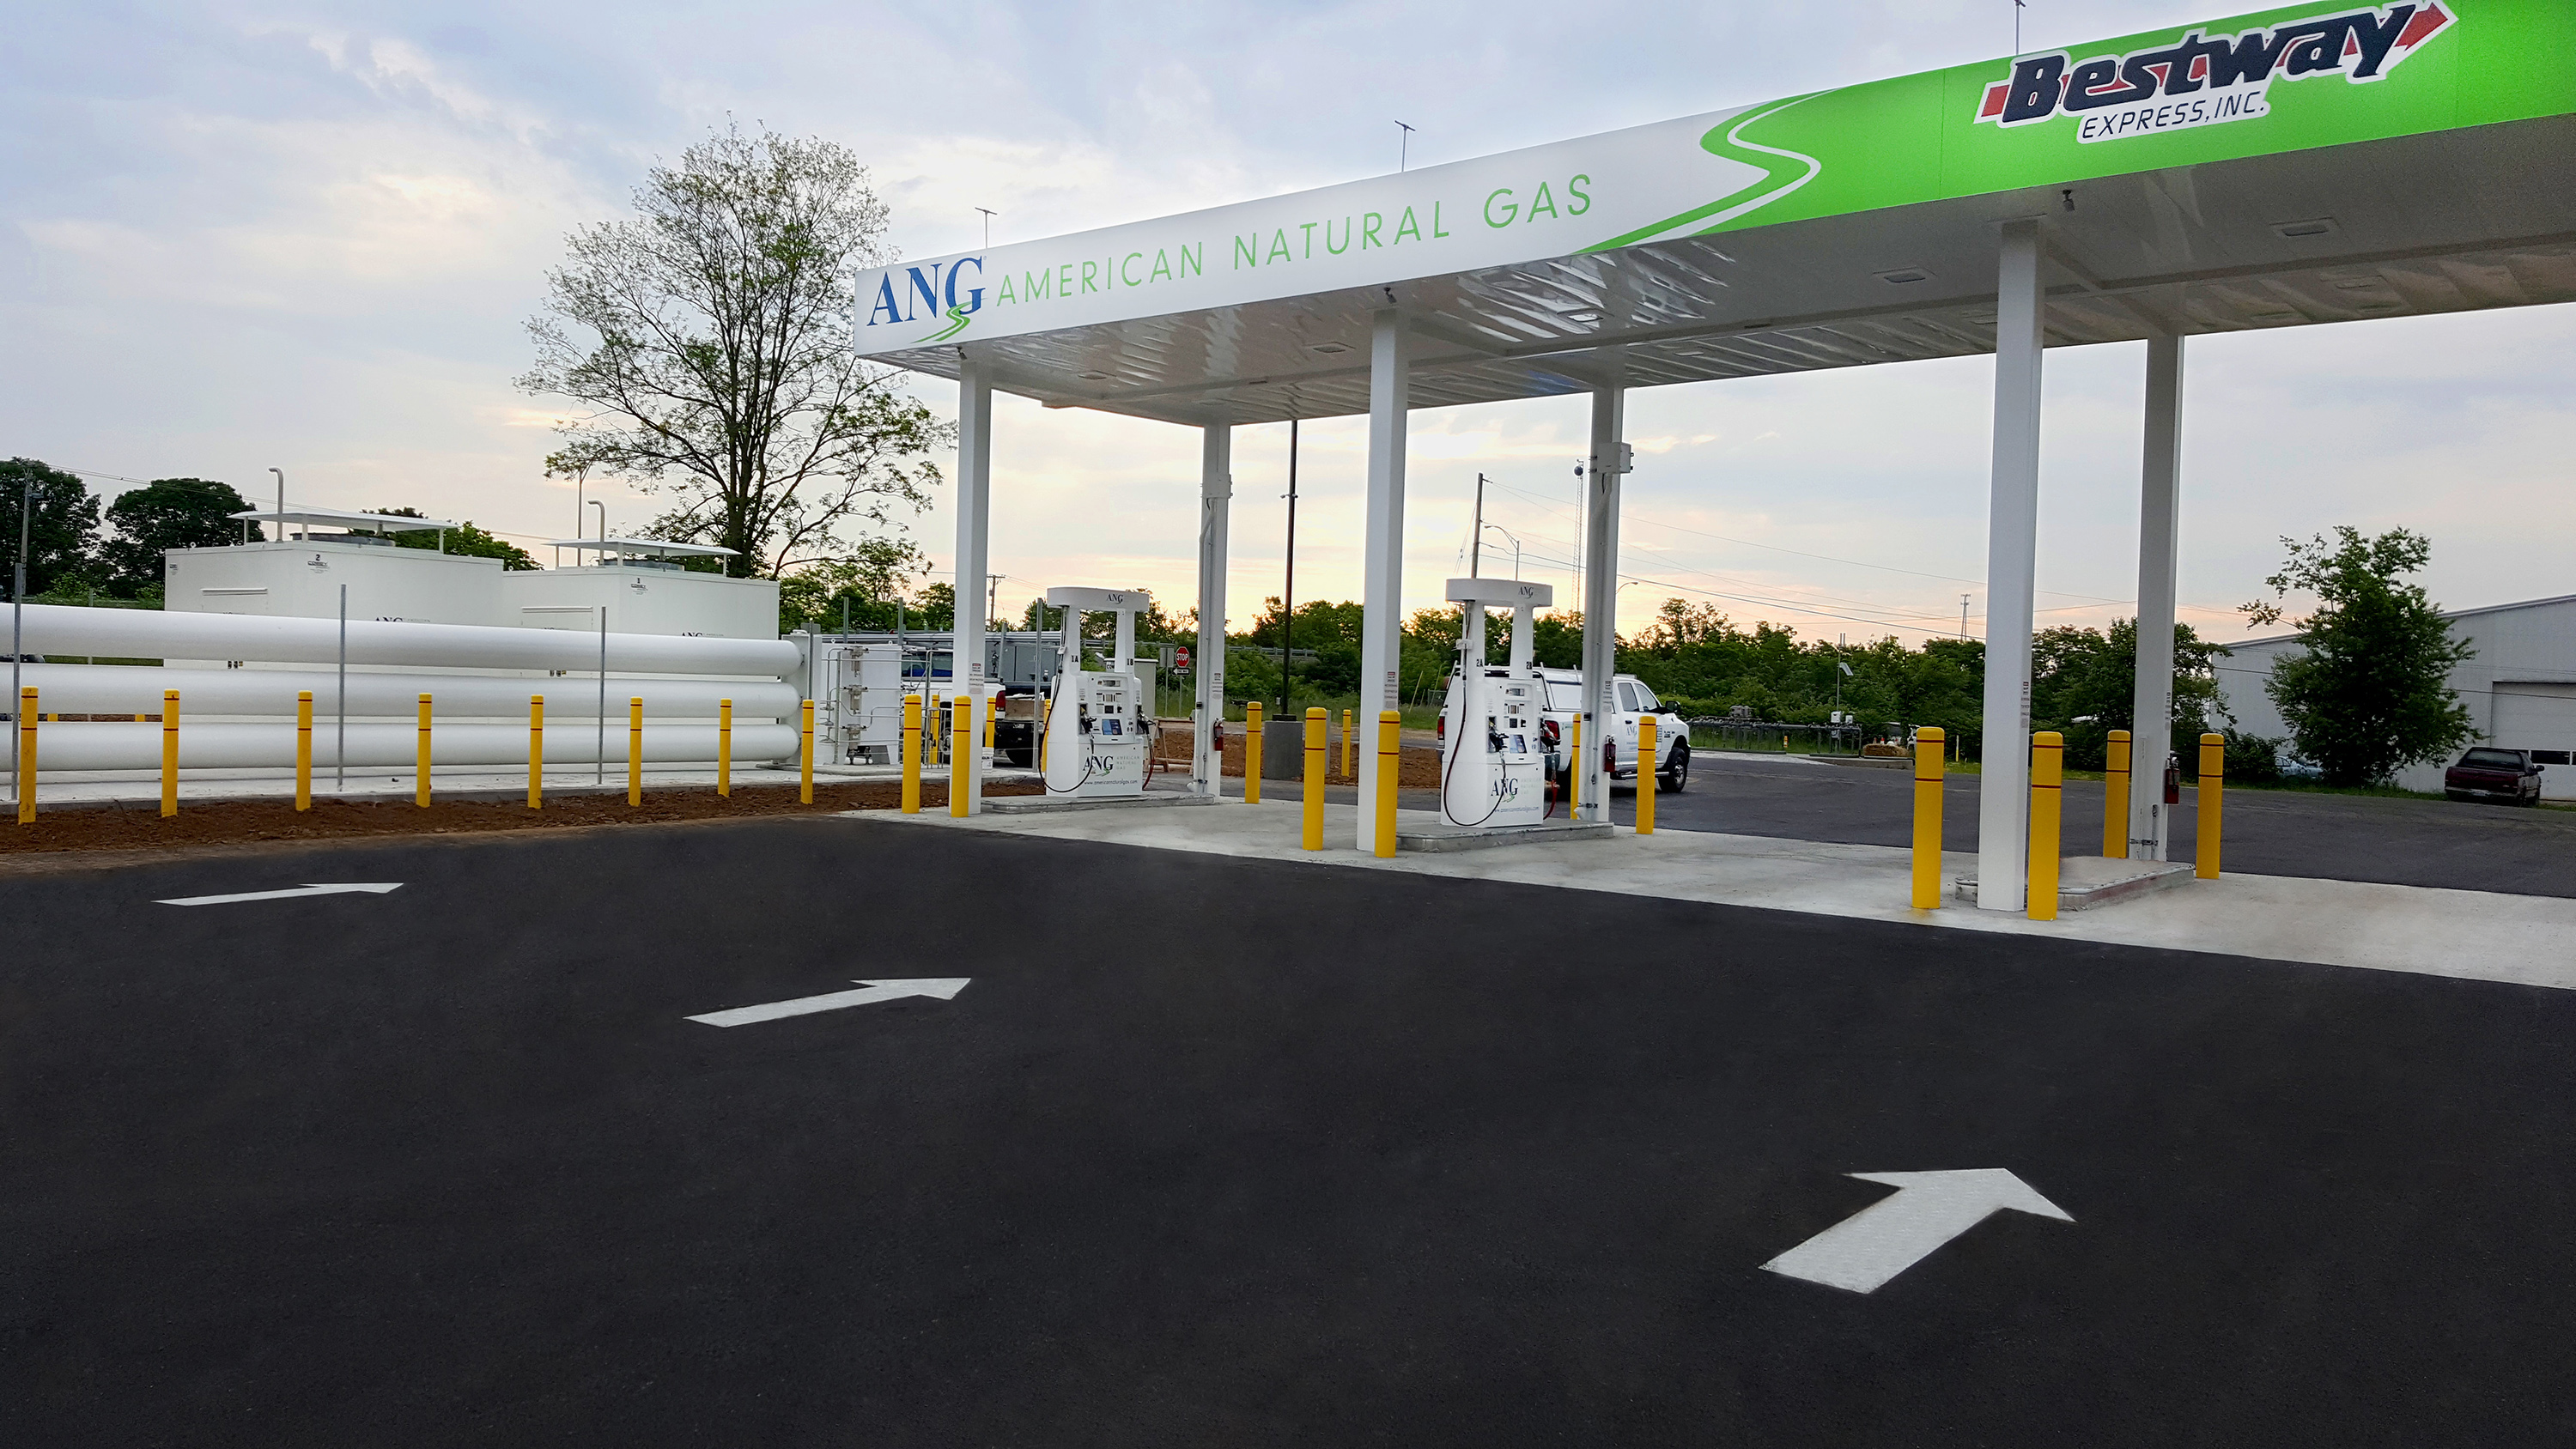 Strategically located along the I-75/I-64 corridor the new station brings CNG to the region’s robust automotive, agriculture, and transportation industry operations.